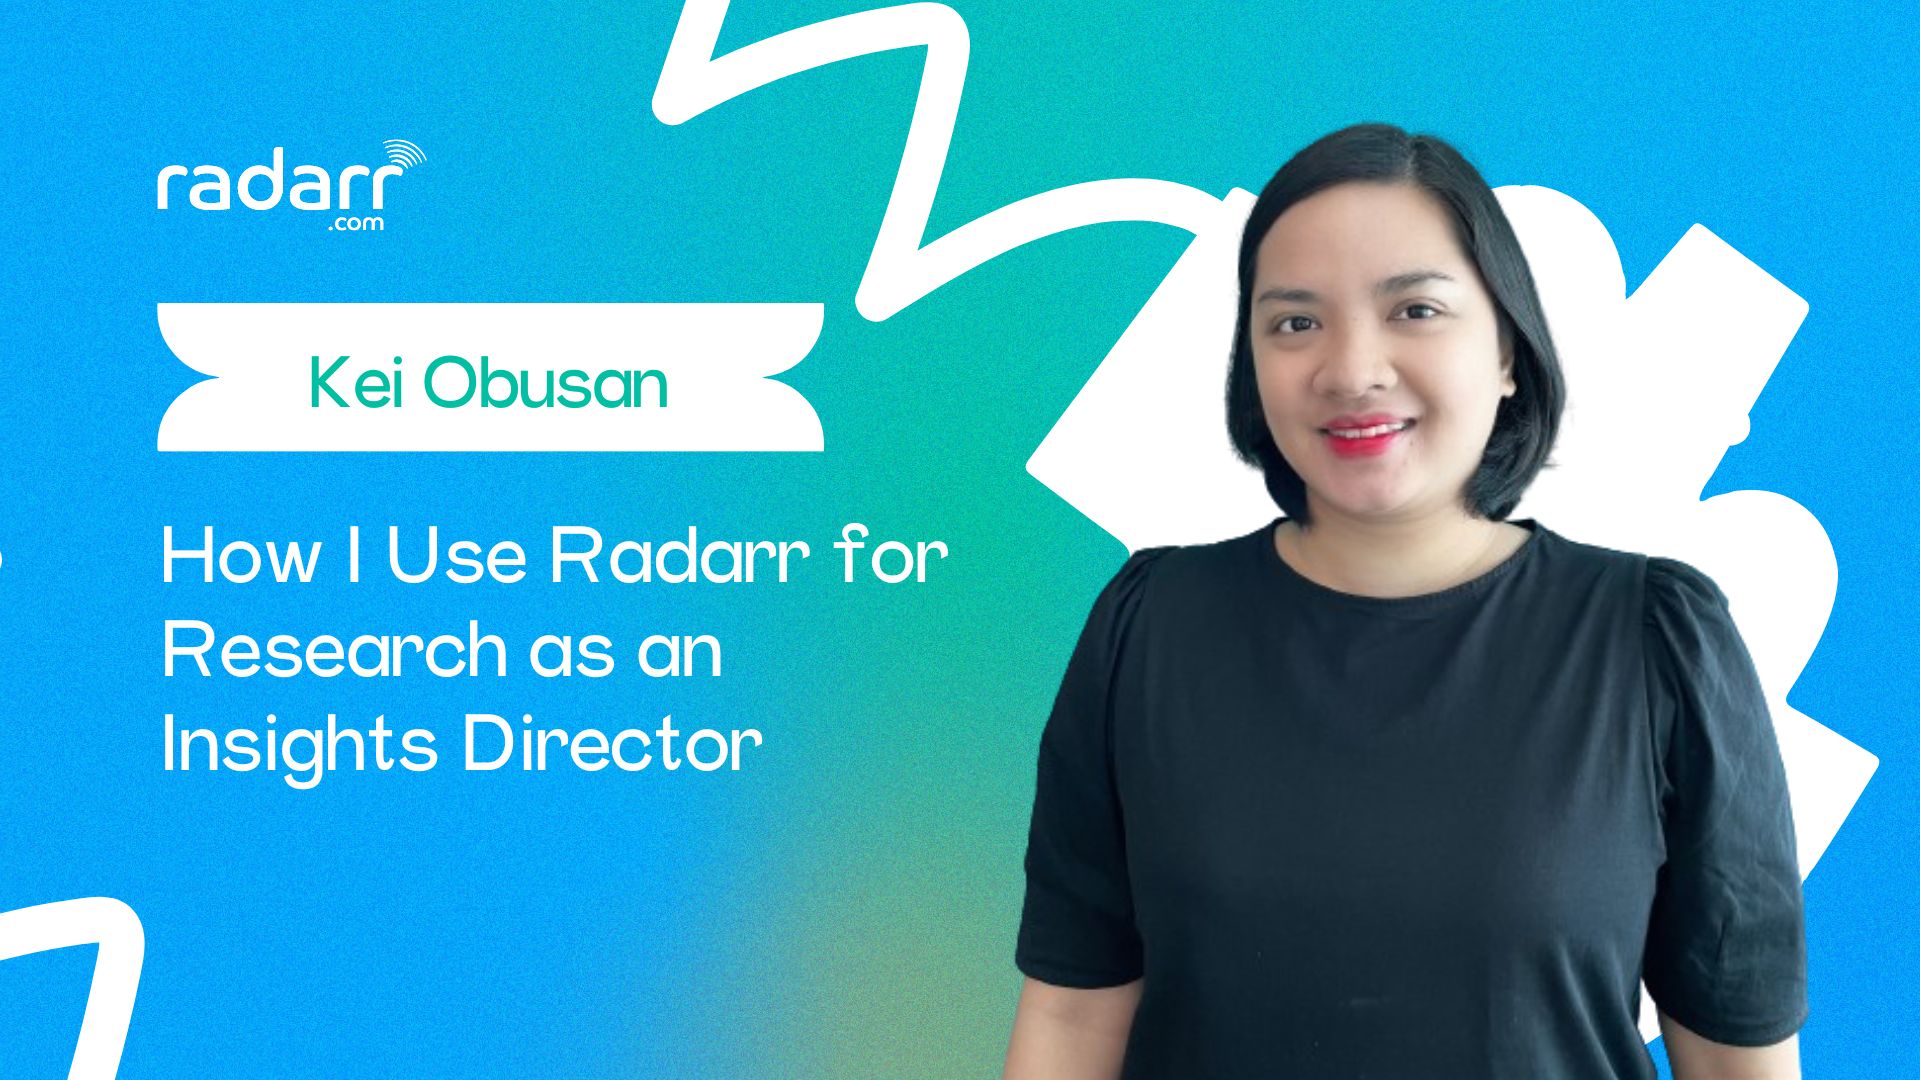 How I Use Radarr for Research as an Insights Director (Interview With Kei Obusan)